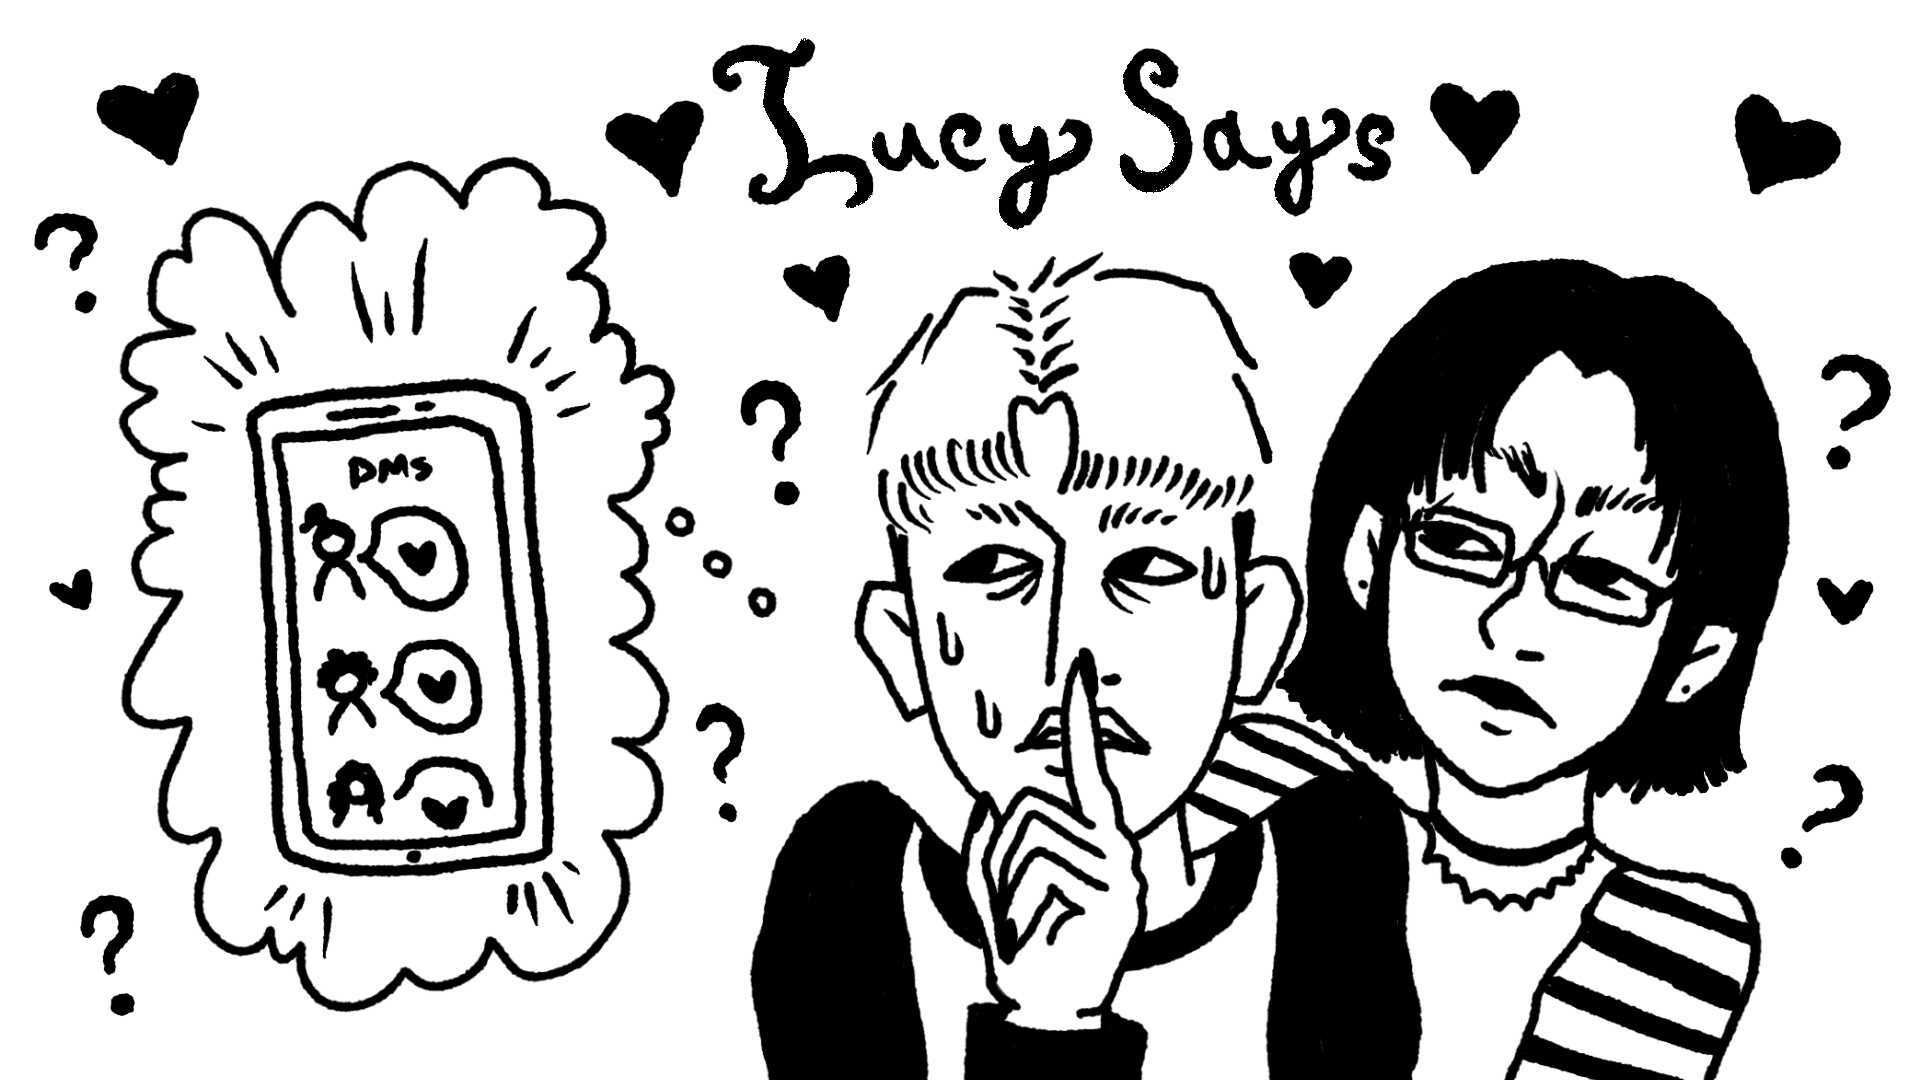 Black-and-white illustration with a girl looking skeptically at a boy, who is shushing with his finger. In the boy's thought bubble is a phone with many DMs.